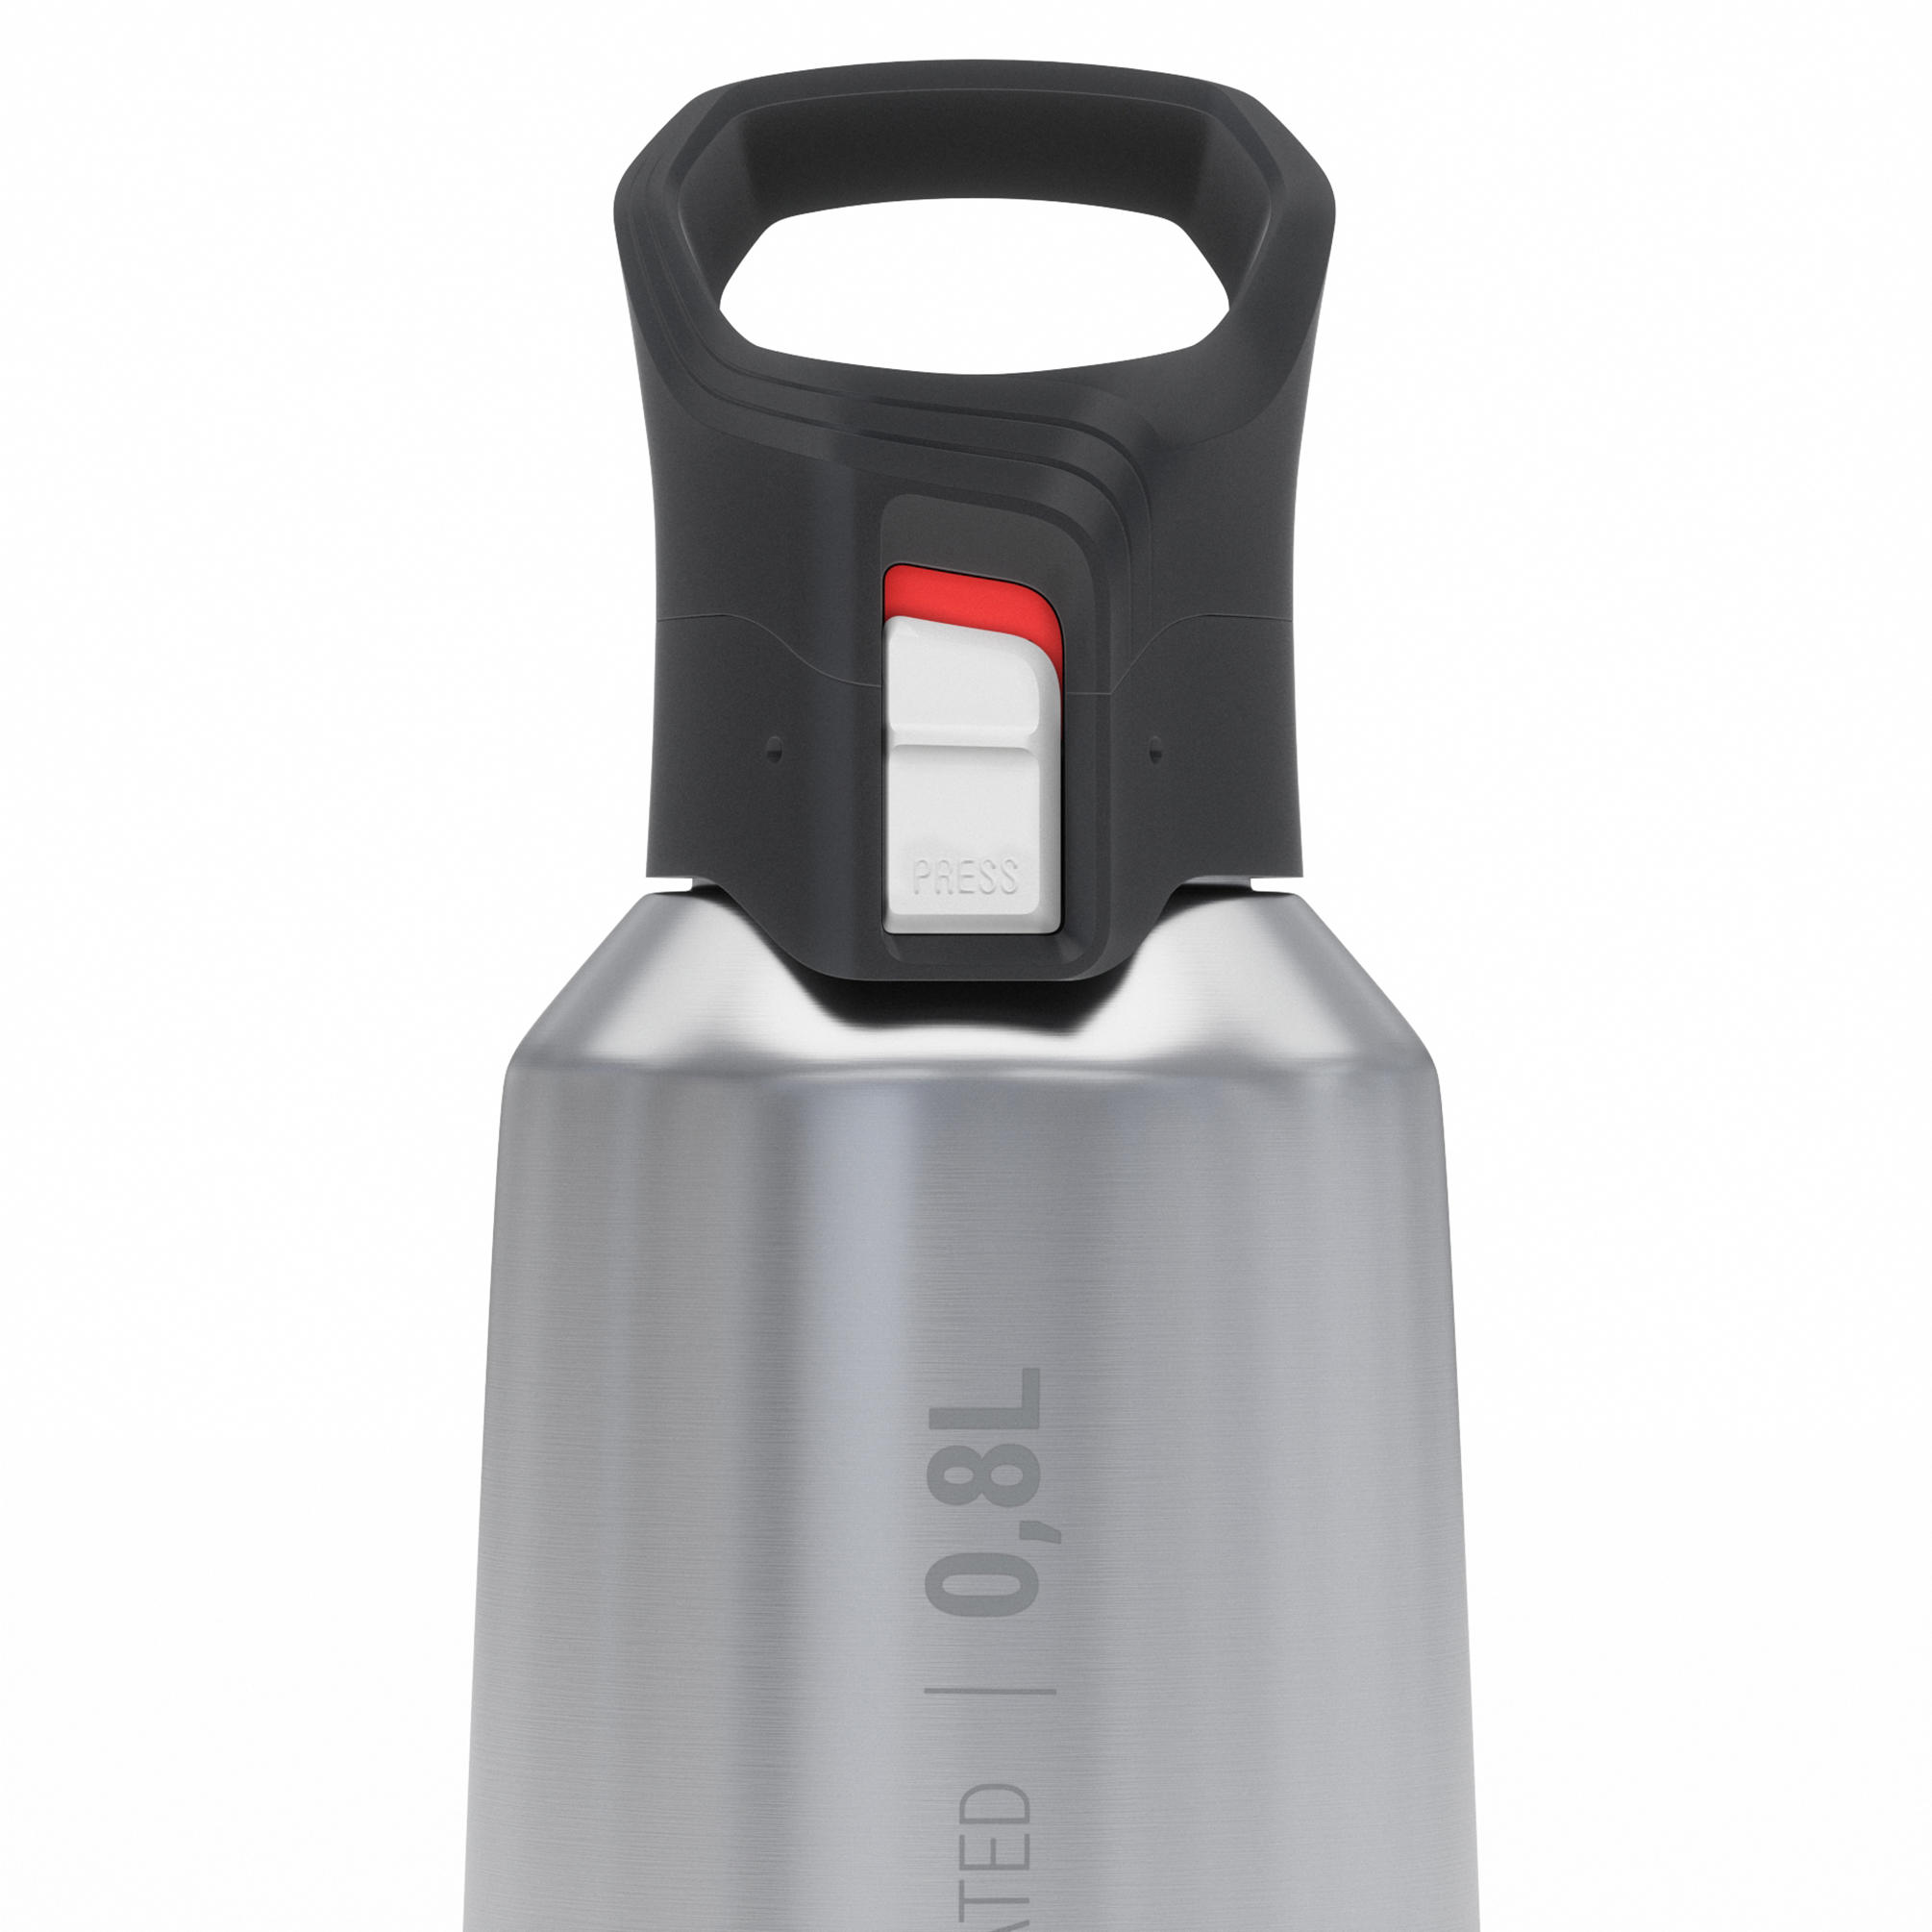 0.8 L stainless steel water bottle with quick-open cap for hiking - Red 34/35